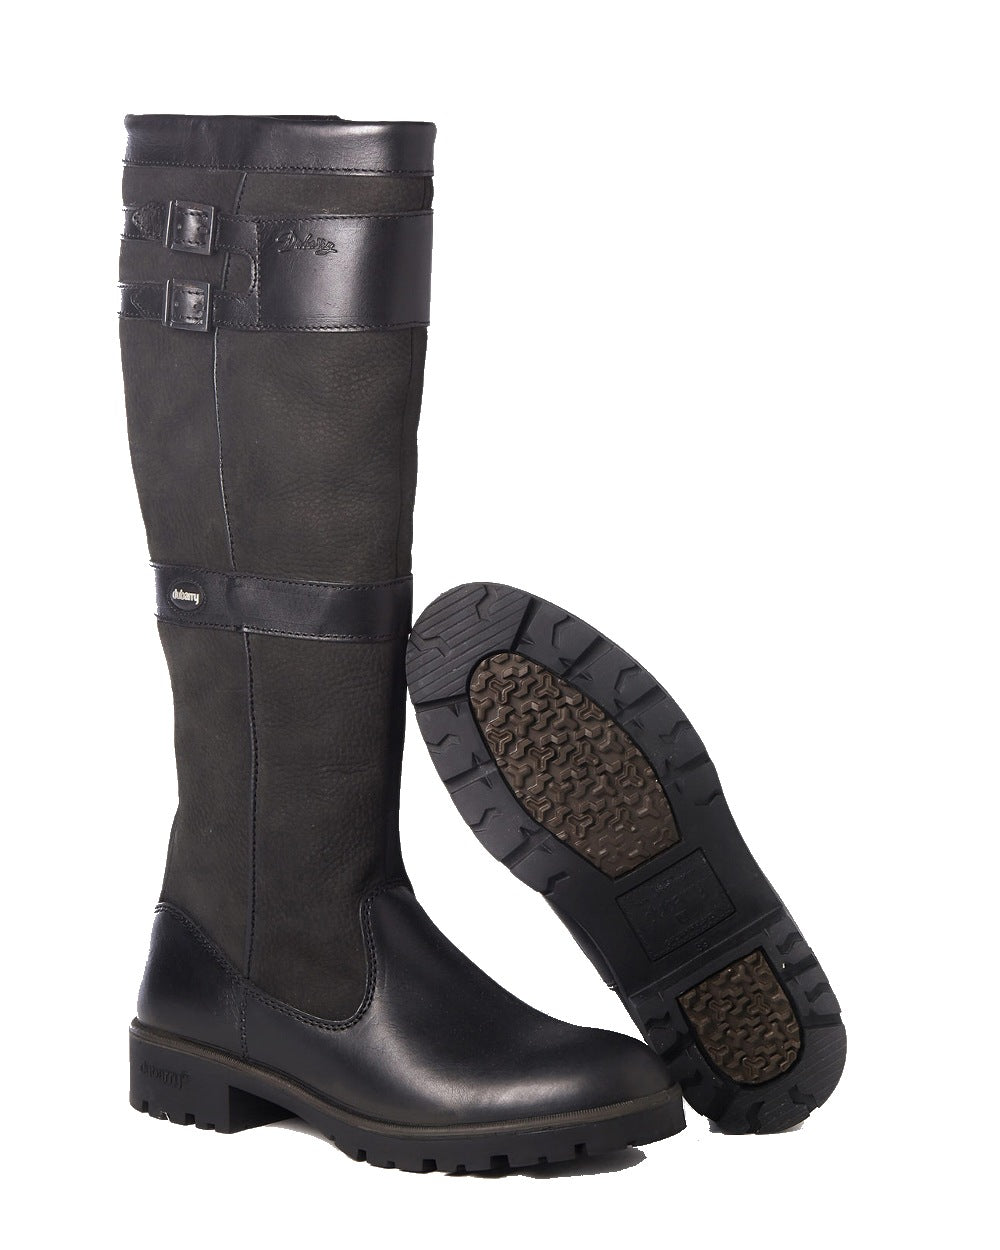 Dubarry Longford Country Boots in Black 